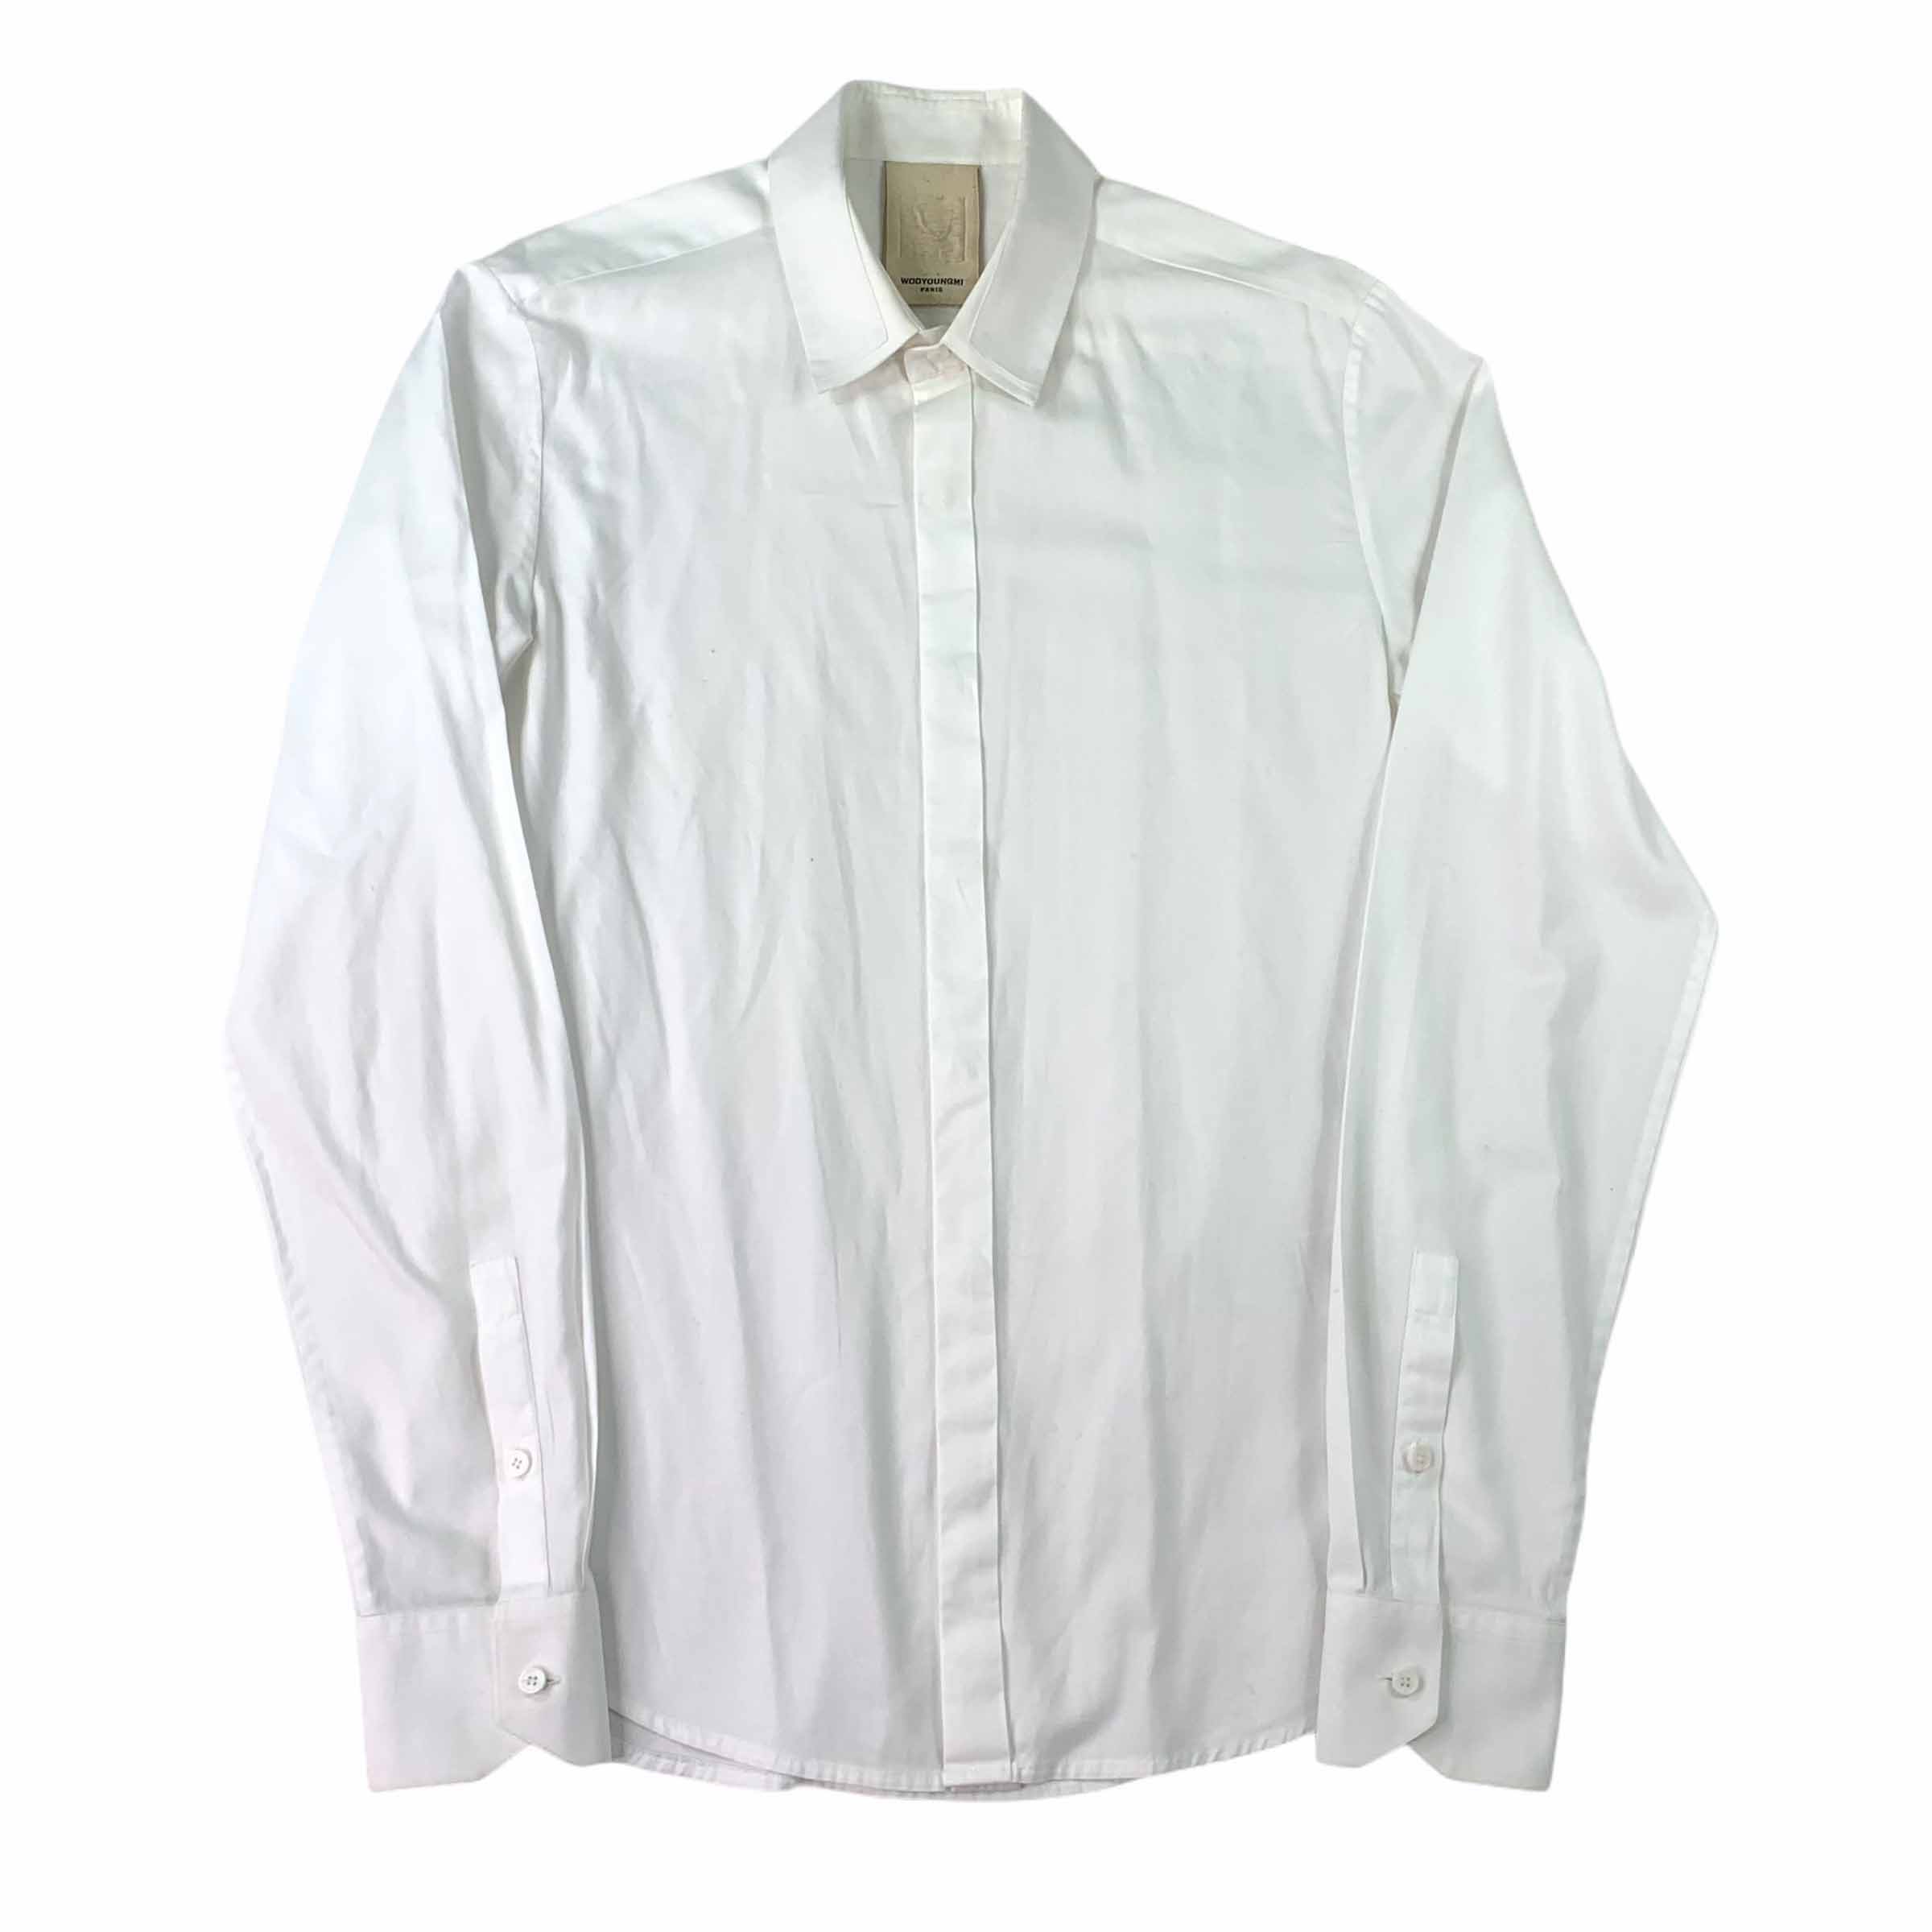 [Wooyoungmi] Collar Point Shirt WH - Size 46